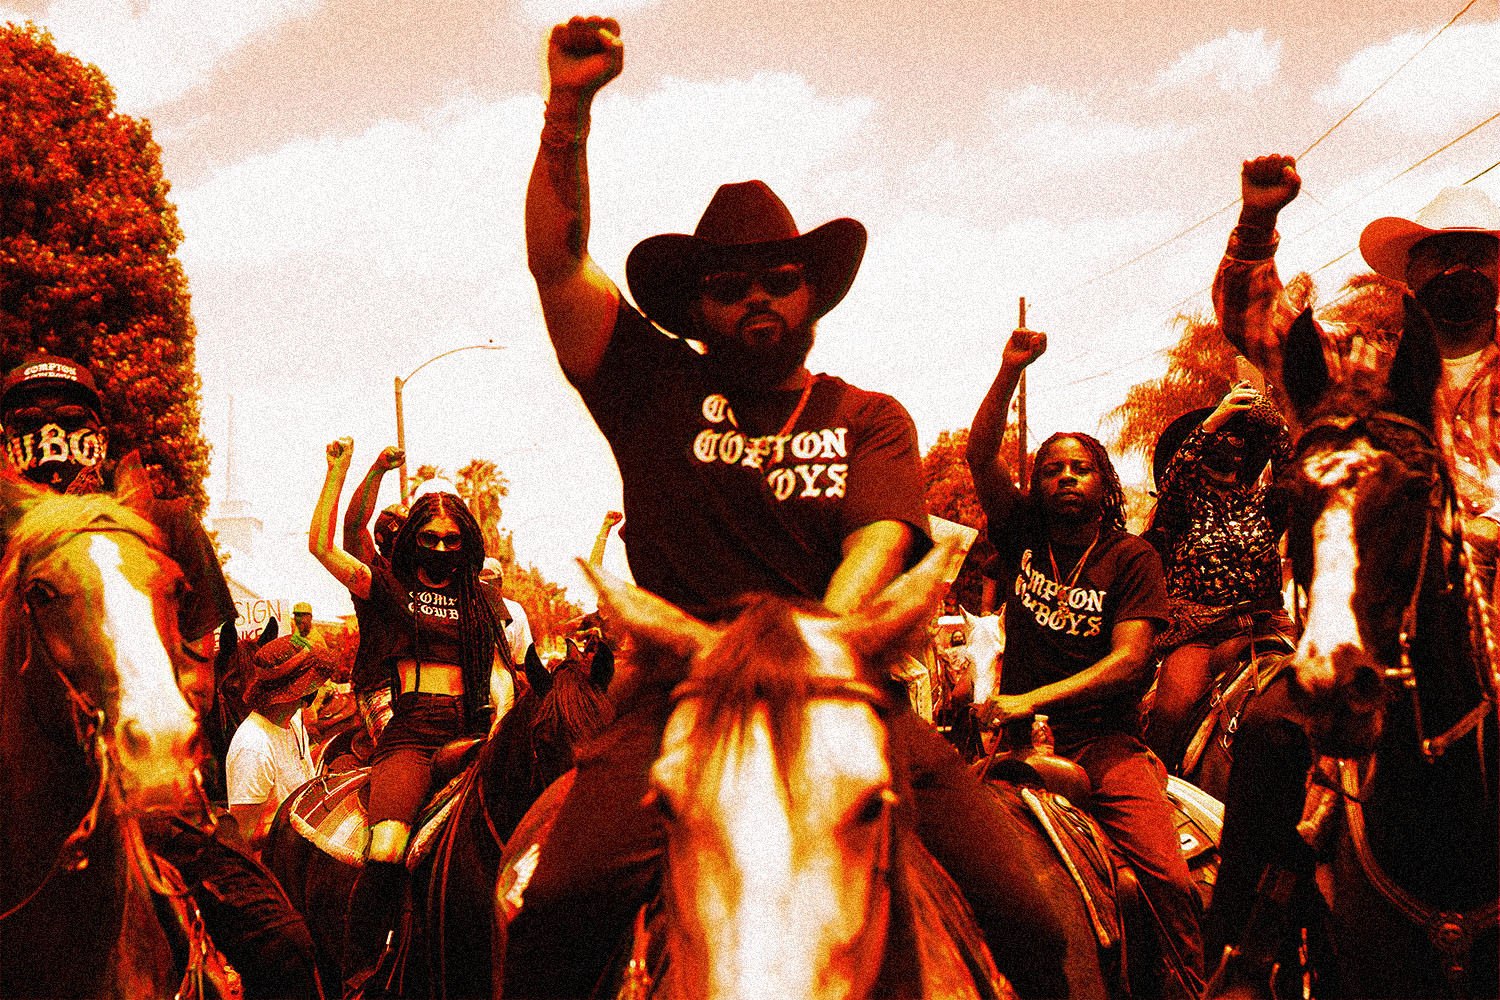 Compton Cowboys ride in a peaceful protest after the death of George Floyd